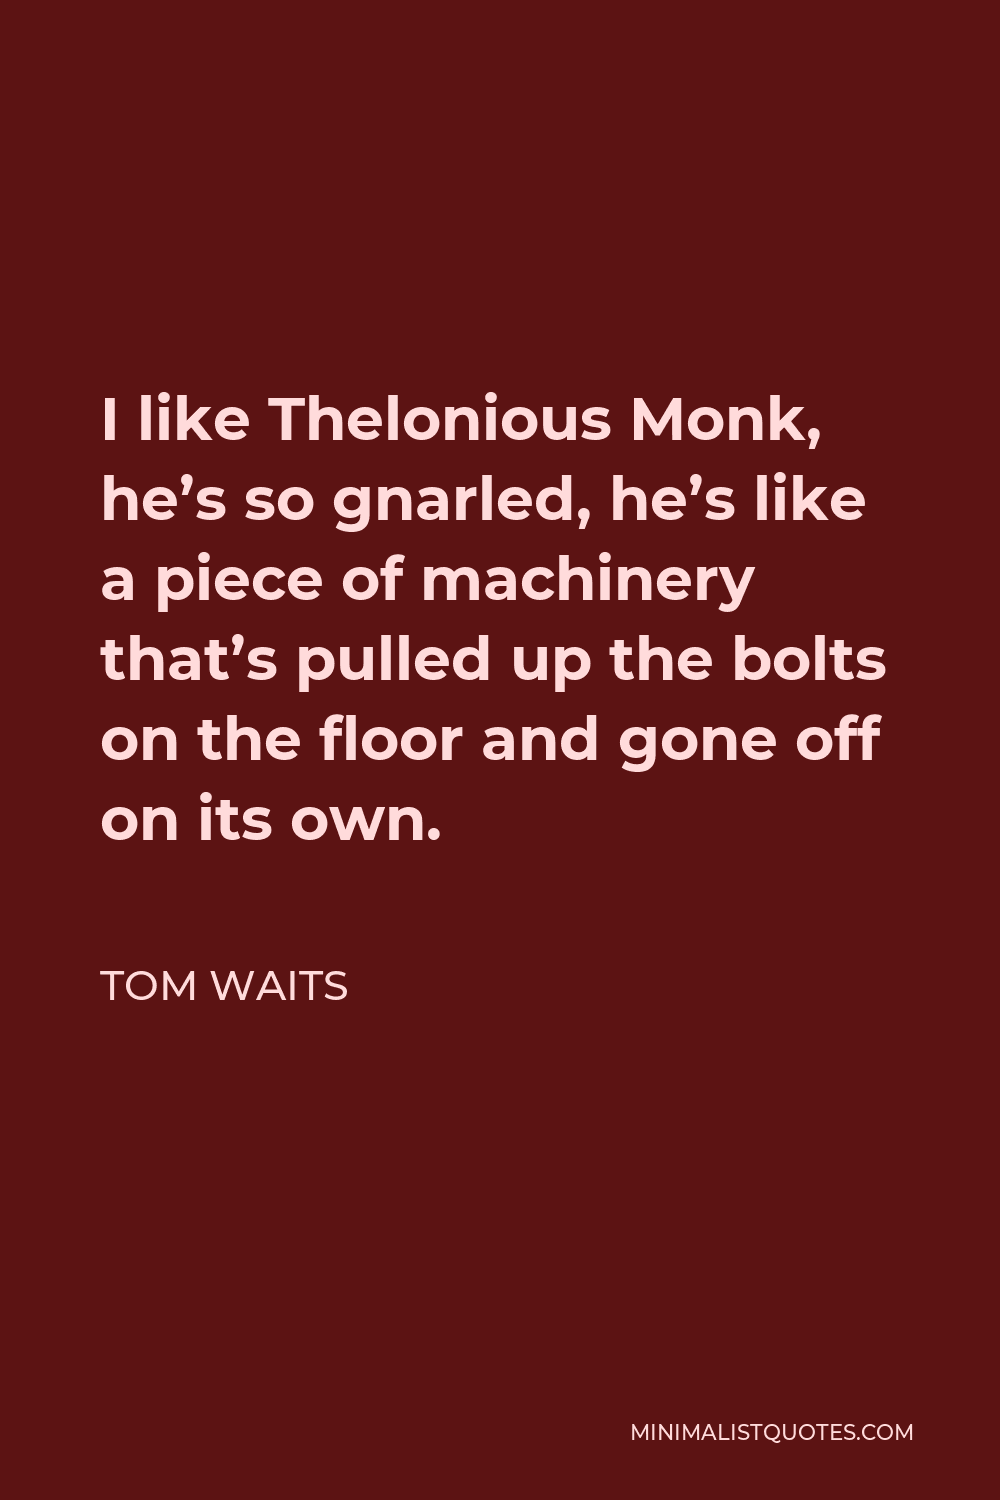 Tom Waits Quote - I like Thelonious Monk, he’s so gnarled, he’s like a piece of machinery that’s pulled up the bolts on the floor and gone off on its own.